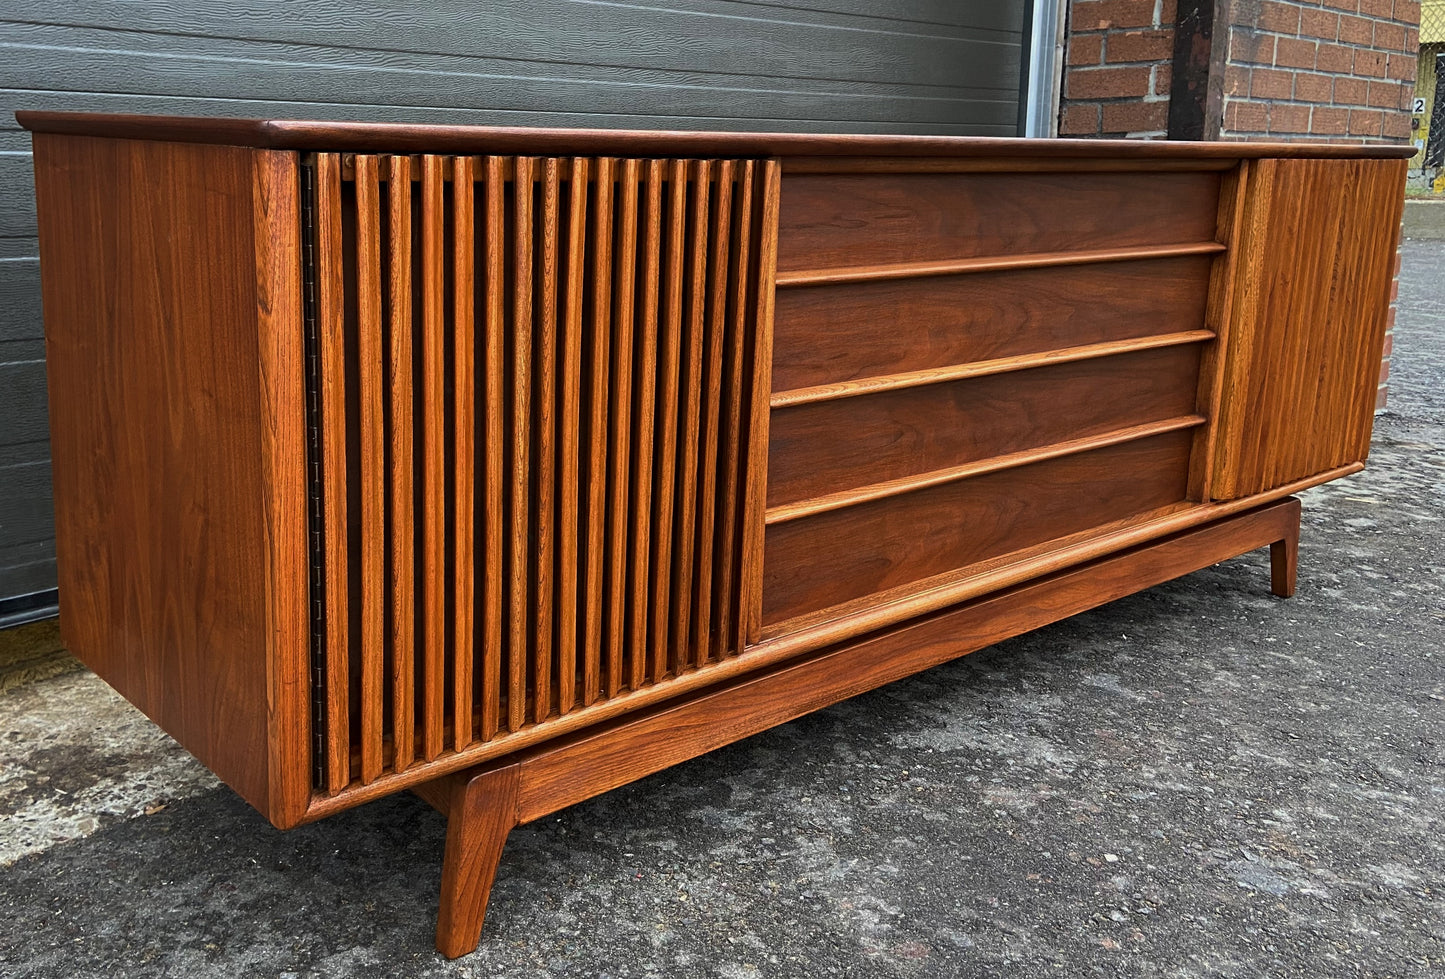 REFINISHED Mid Century Modern Walnut Media Record Player Console 74.5"